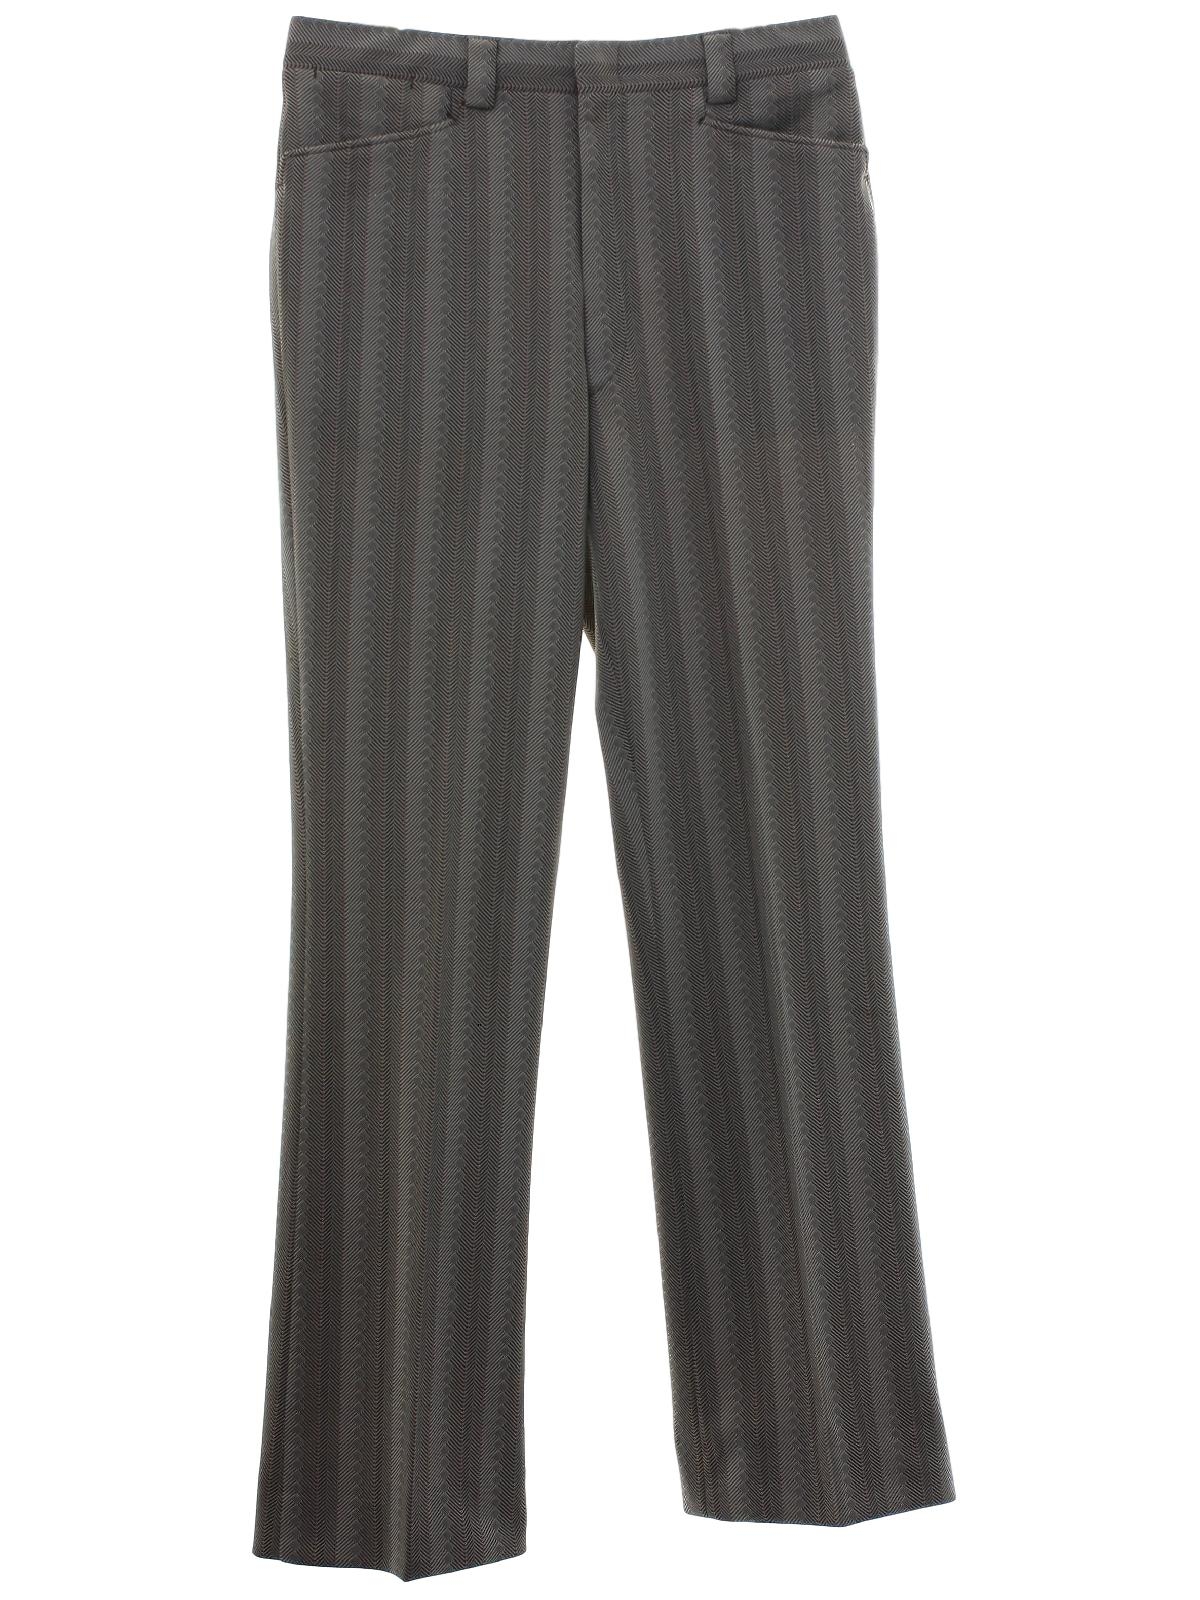 Retro 1970's Flared Pants / Flares: 70s -No Label- Mens beige and brown ...